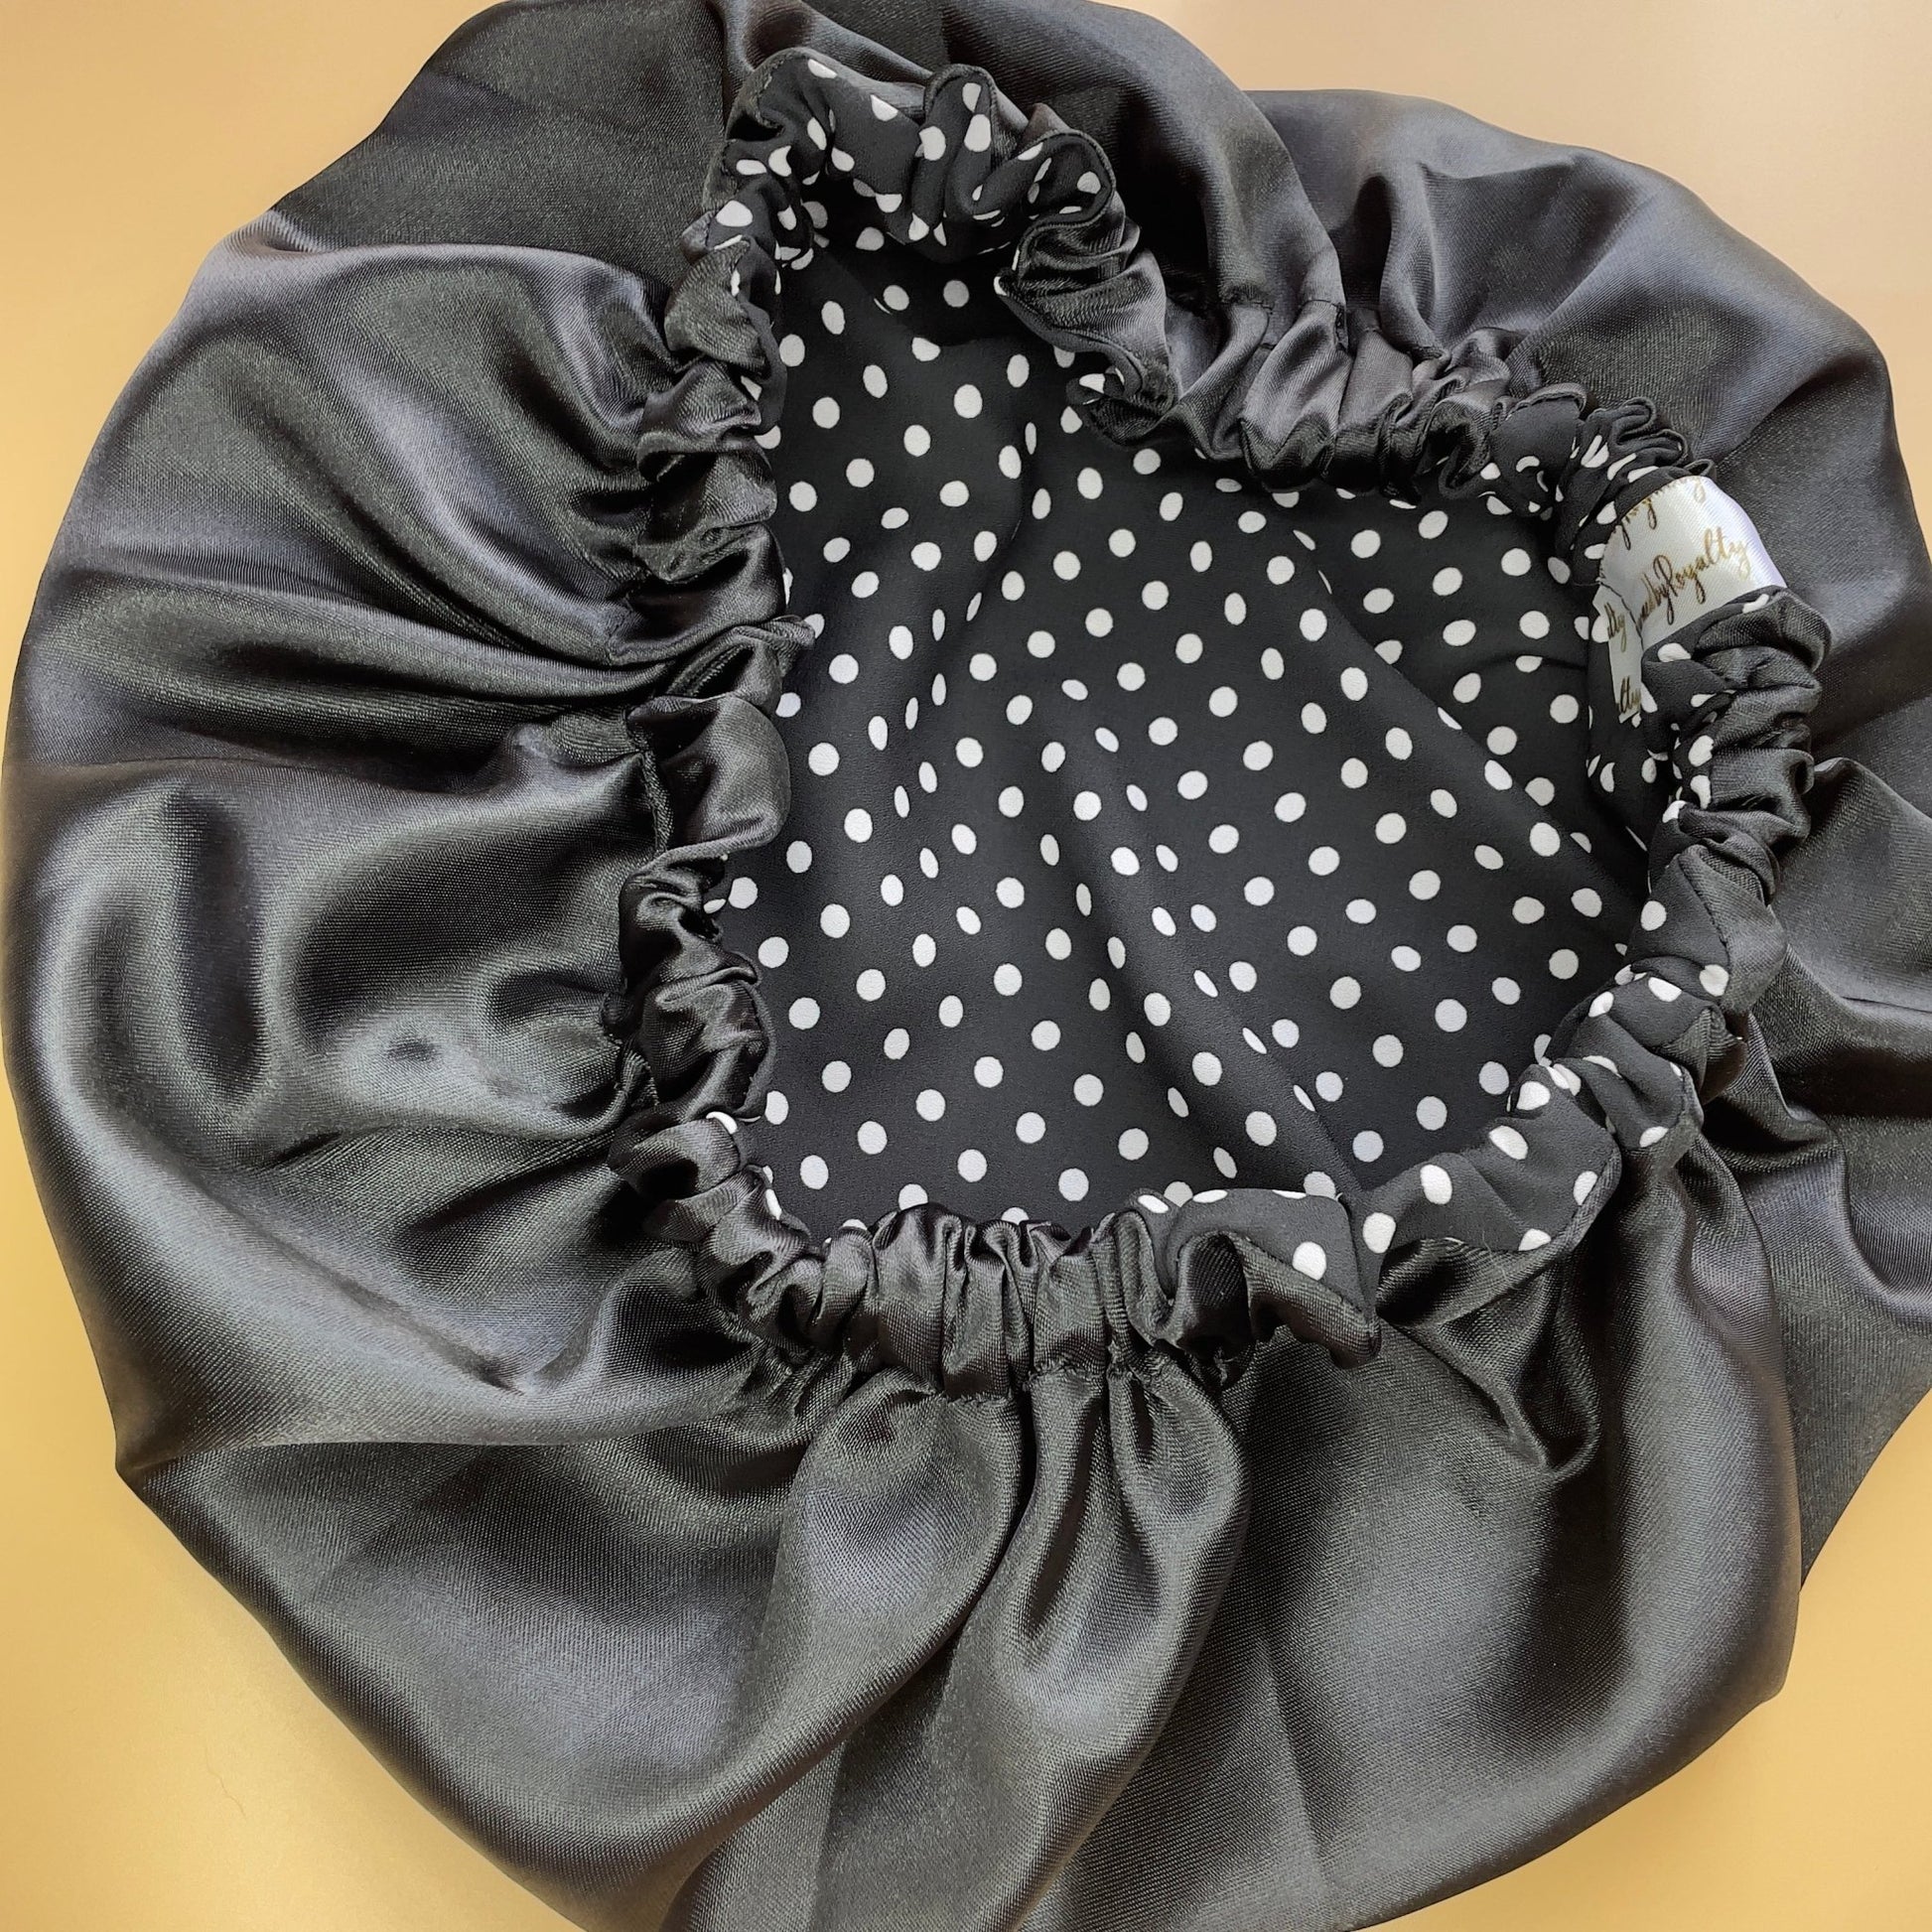 Midnight Polka Satin-Lined Bonnet - Crowned by Royalty